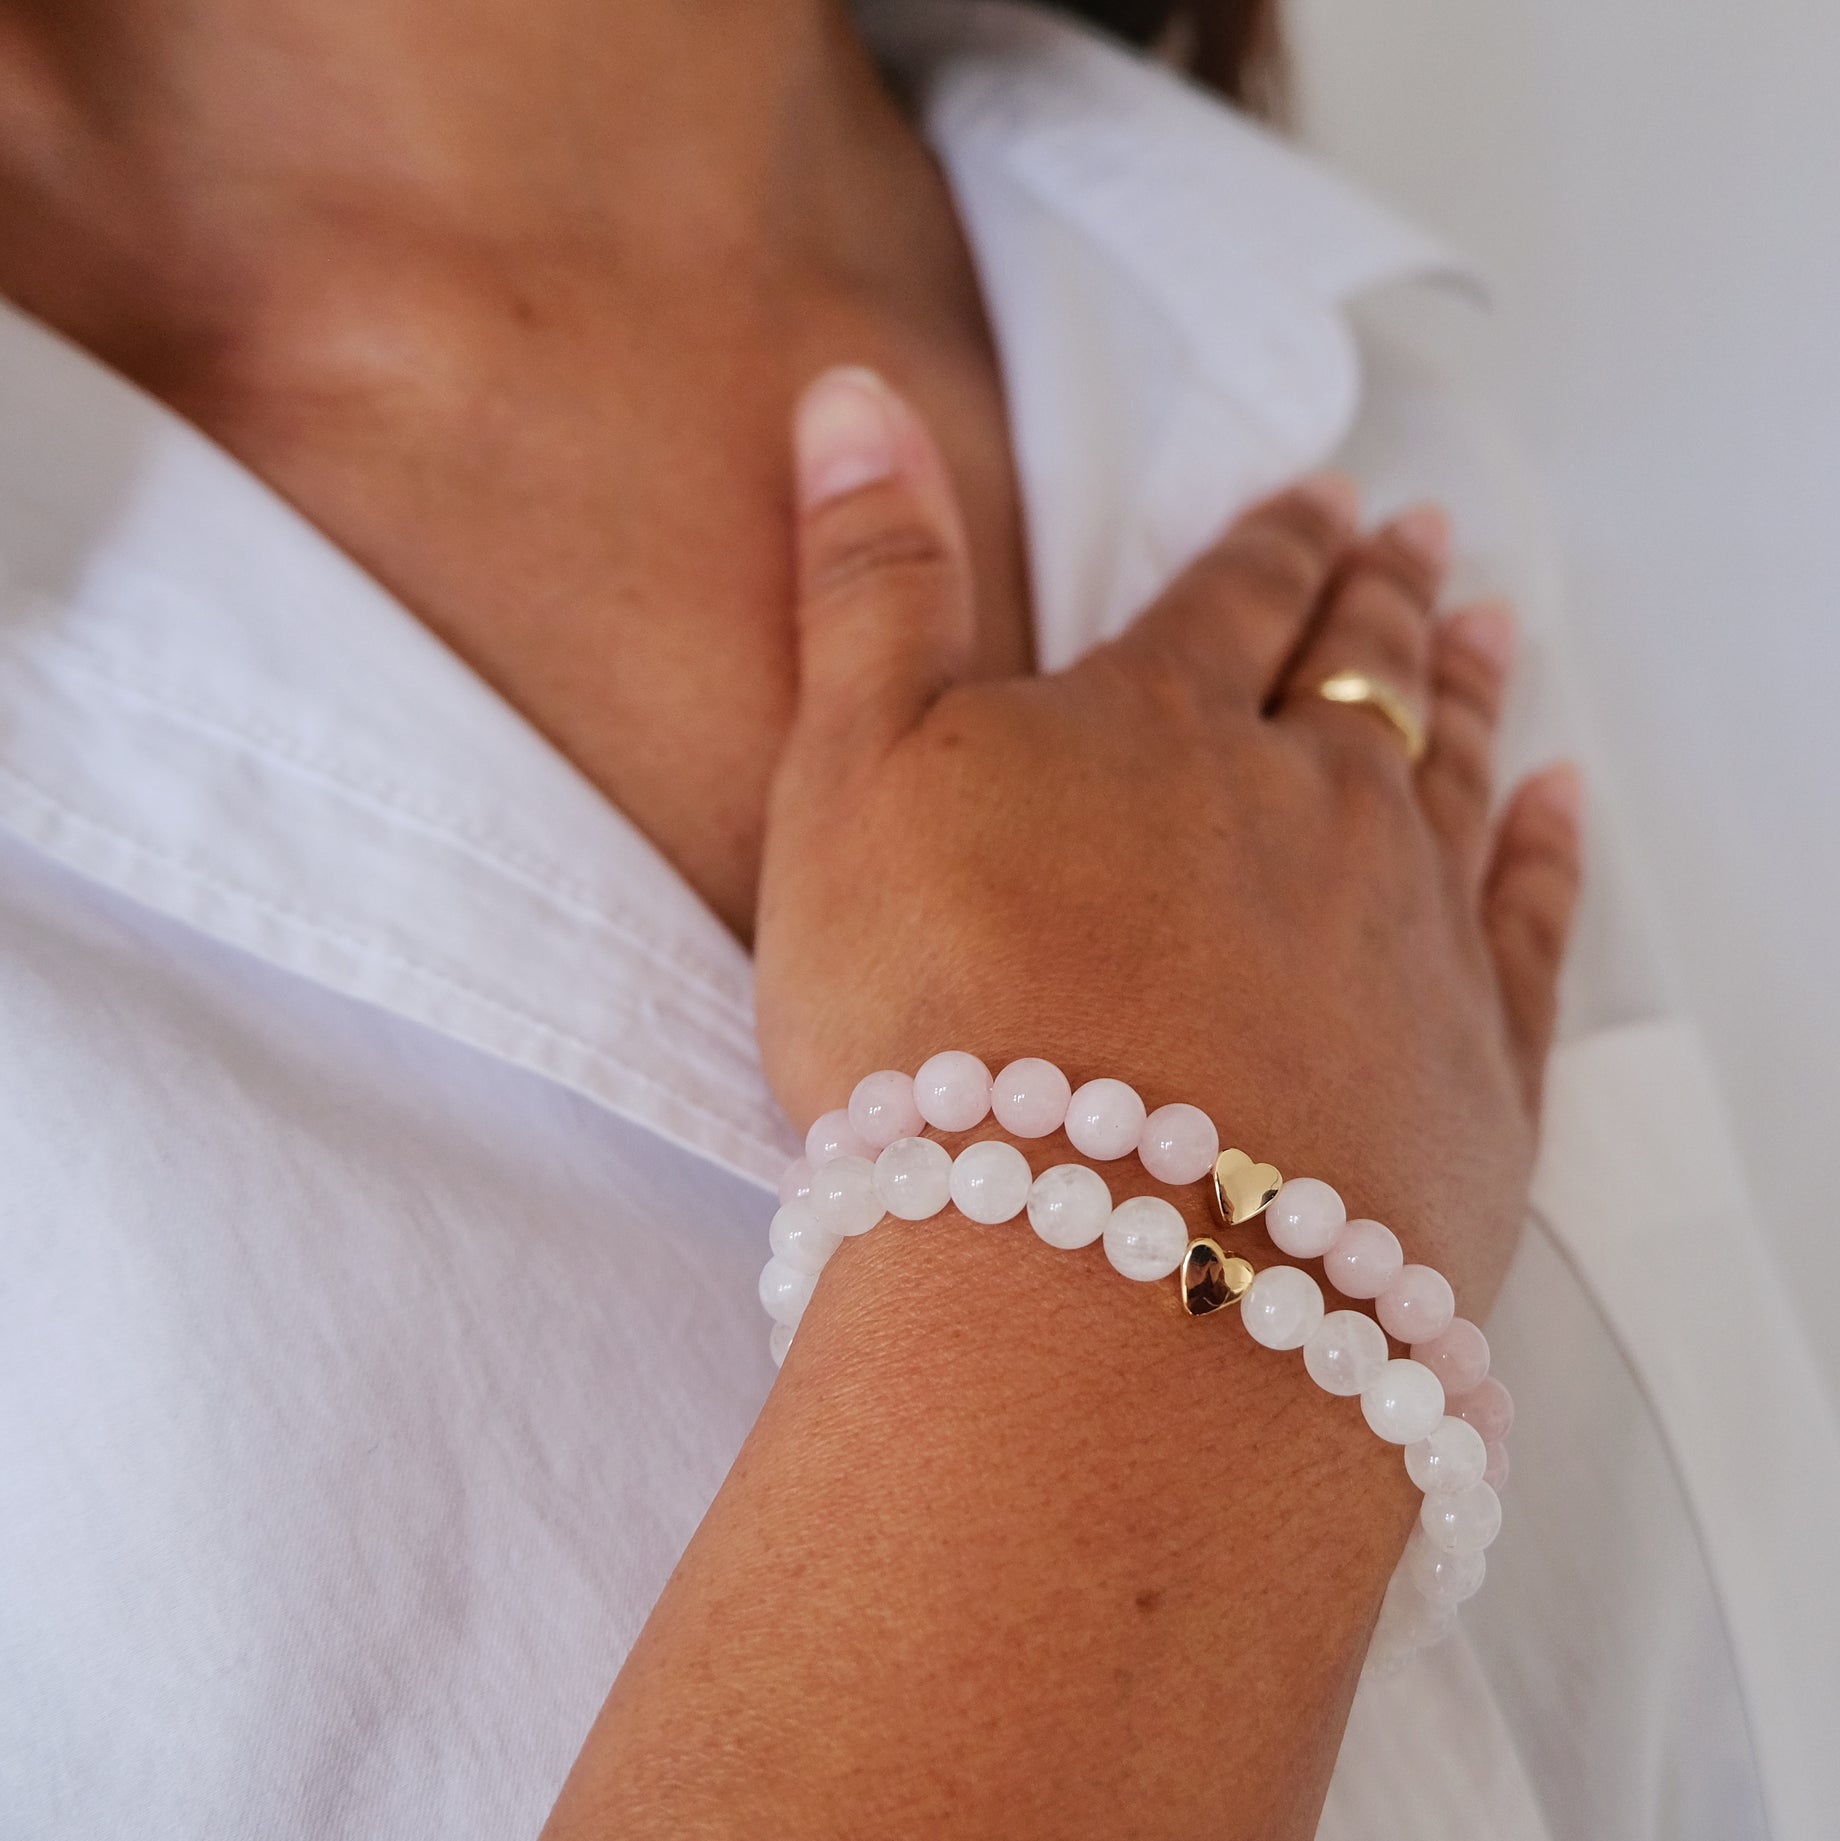 A model wearing a moonstone and rose quartz gemstone bracelet with gold love heart detail